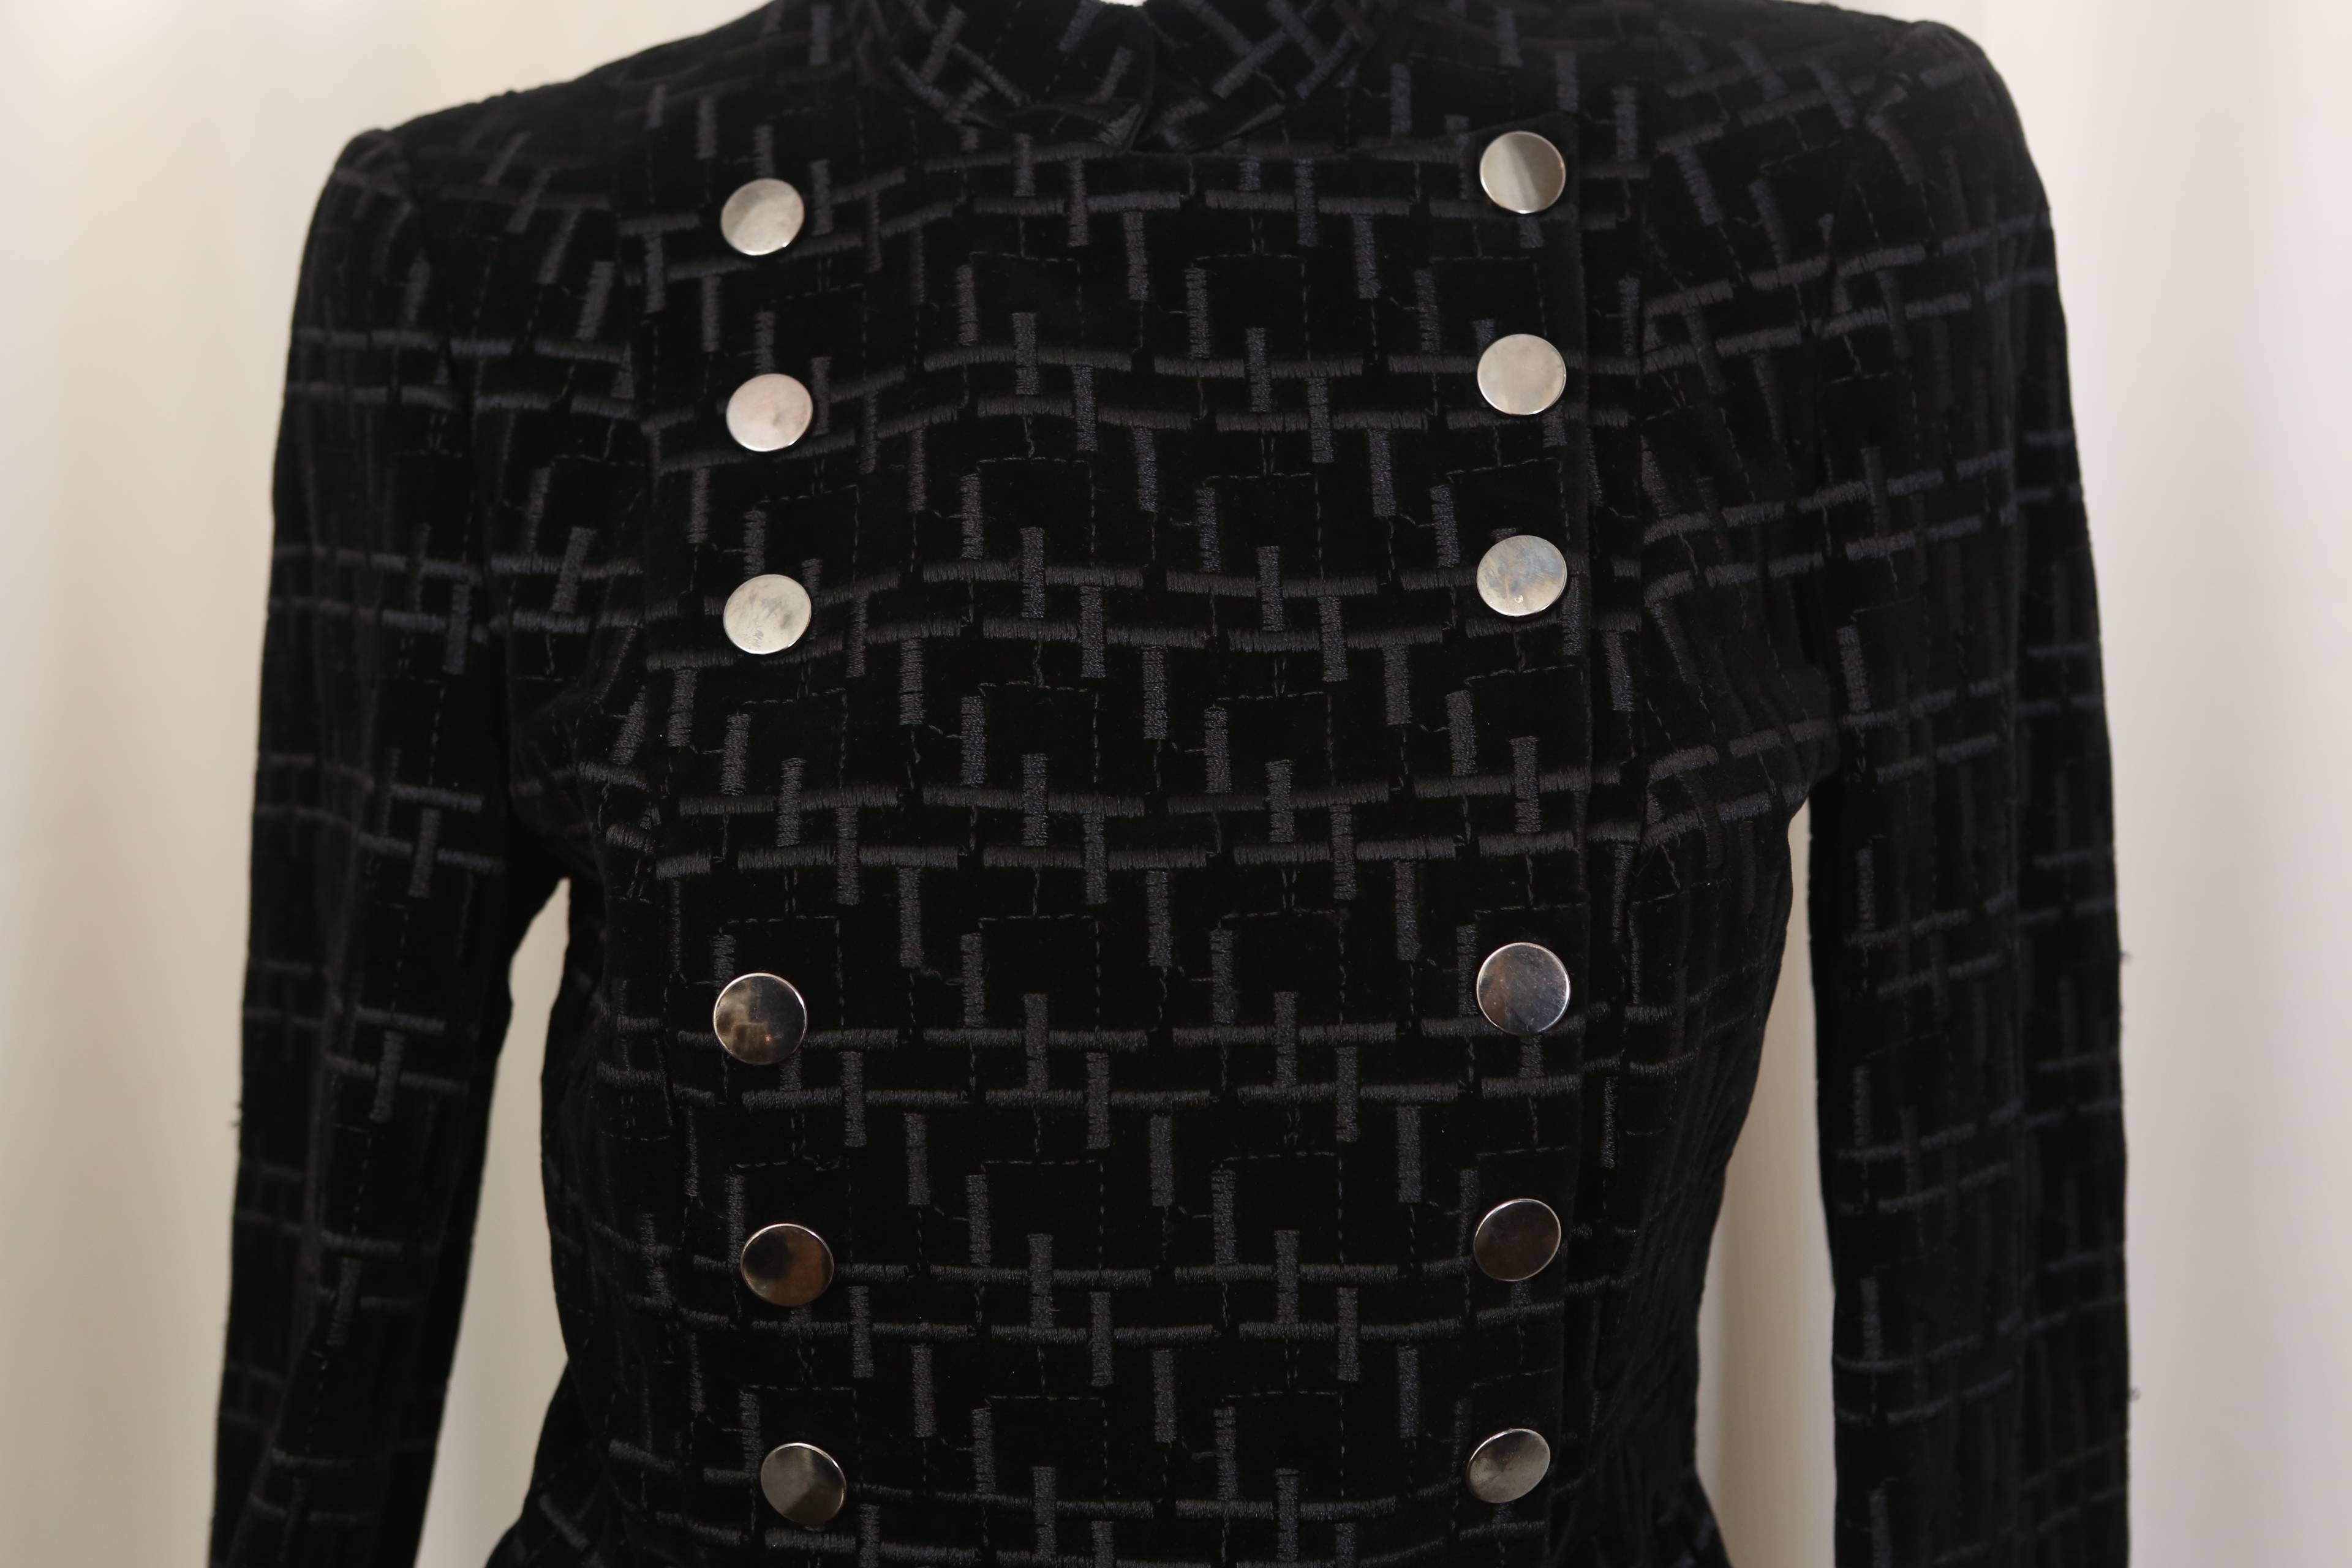 Giorgio Armani black patterned long sleeve jacket with double breasted snap closure.

Sleeve Length: 22"